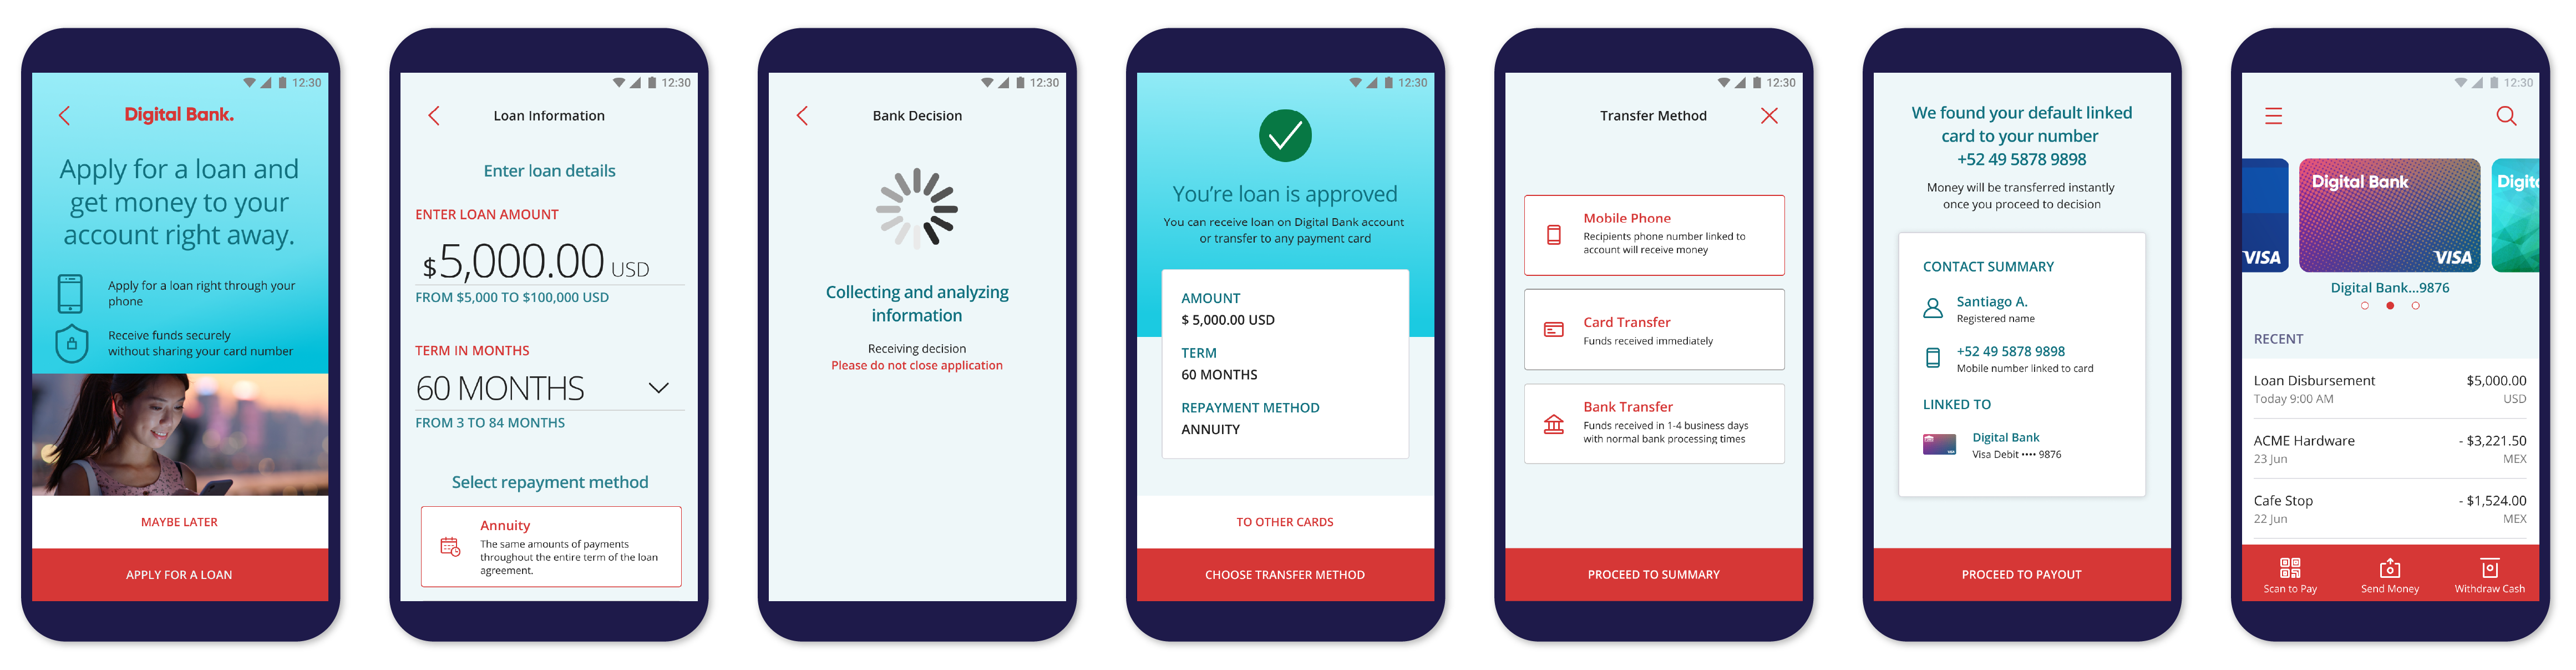 Mobile Screenshots that show how someone can use a bank app to make a loan disbursement with an Alias. The steps demonstrated in these screenshots are described below.